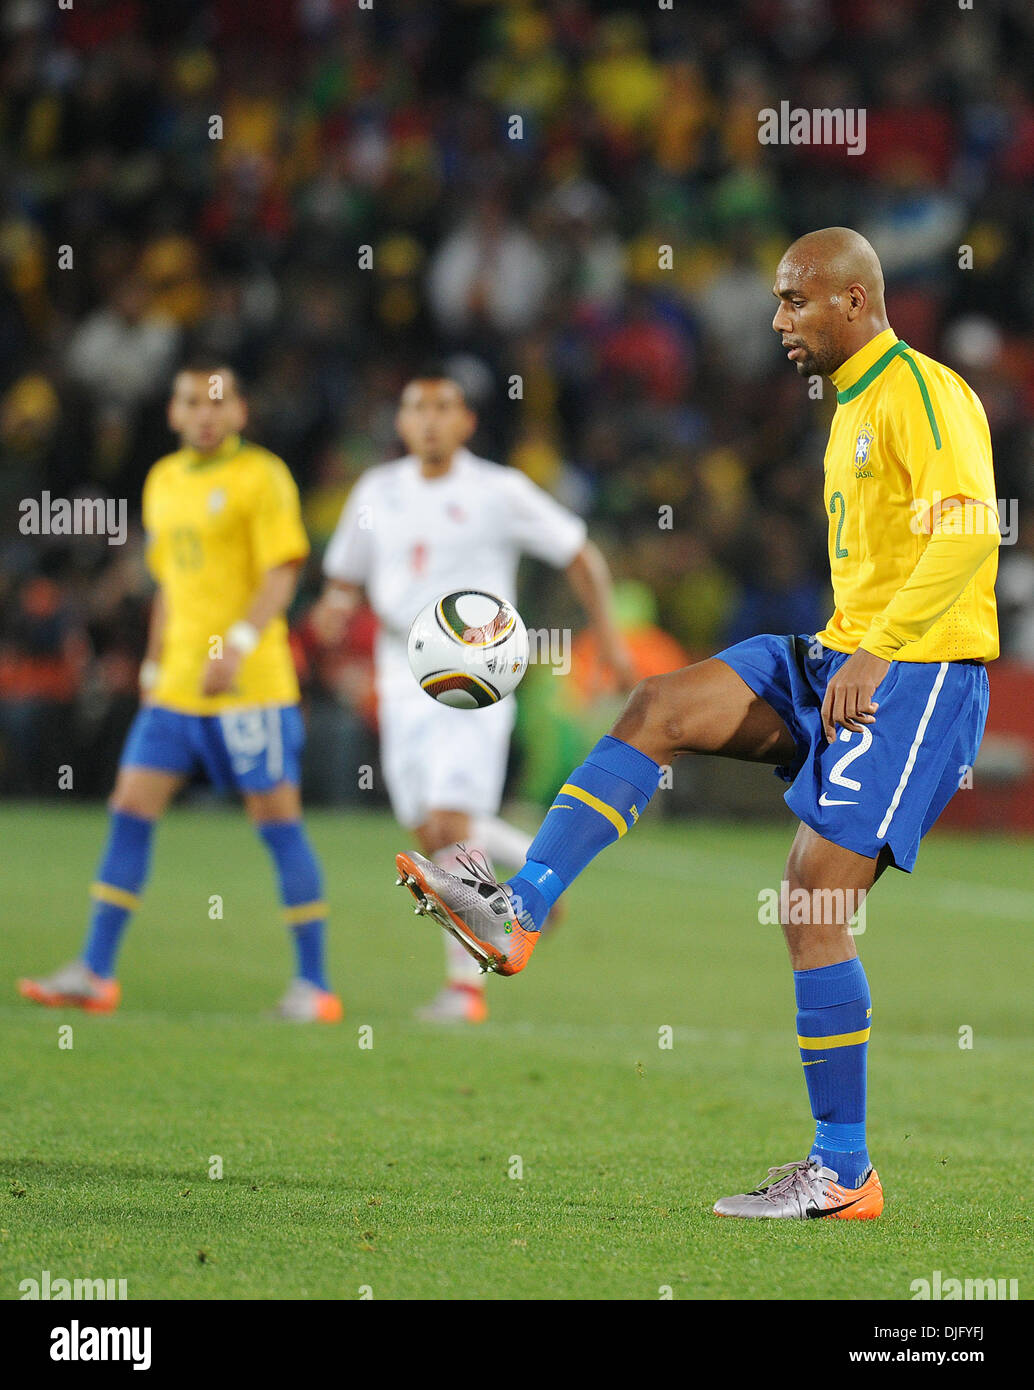 June 28, 2010 - Johannesburg, South Africa - Maicon of Brazil in action during the 2010 FIFA World Cup soccer match between Brazil and Chile at Ellis Park Stadium on June 28, 2010 in Johannesburg, South Africa. (Credit Image: © Luca Ghidoni/ZUMApress.com) Stock Photo